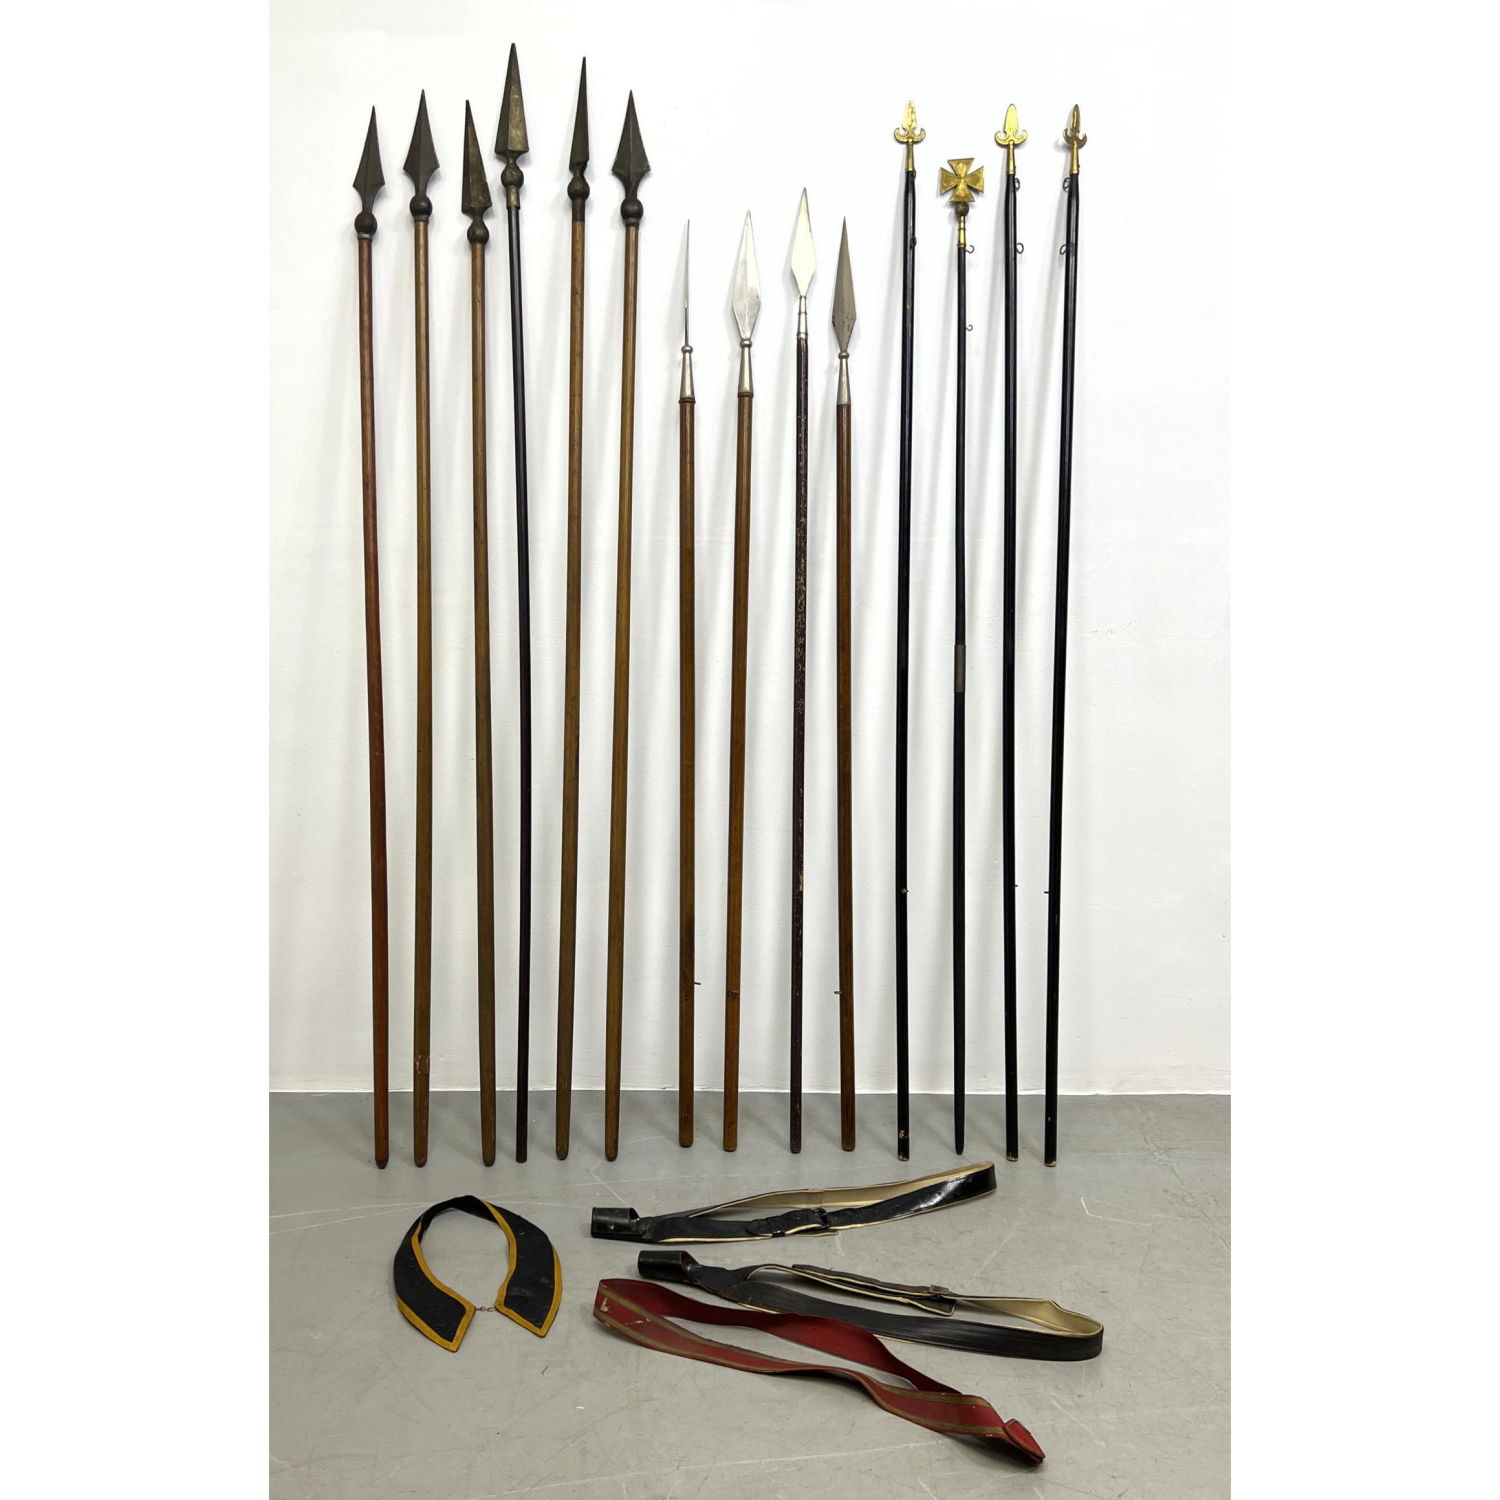 14pc ceremonial flag poles and